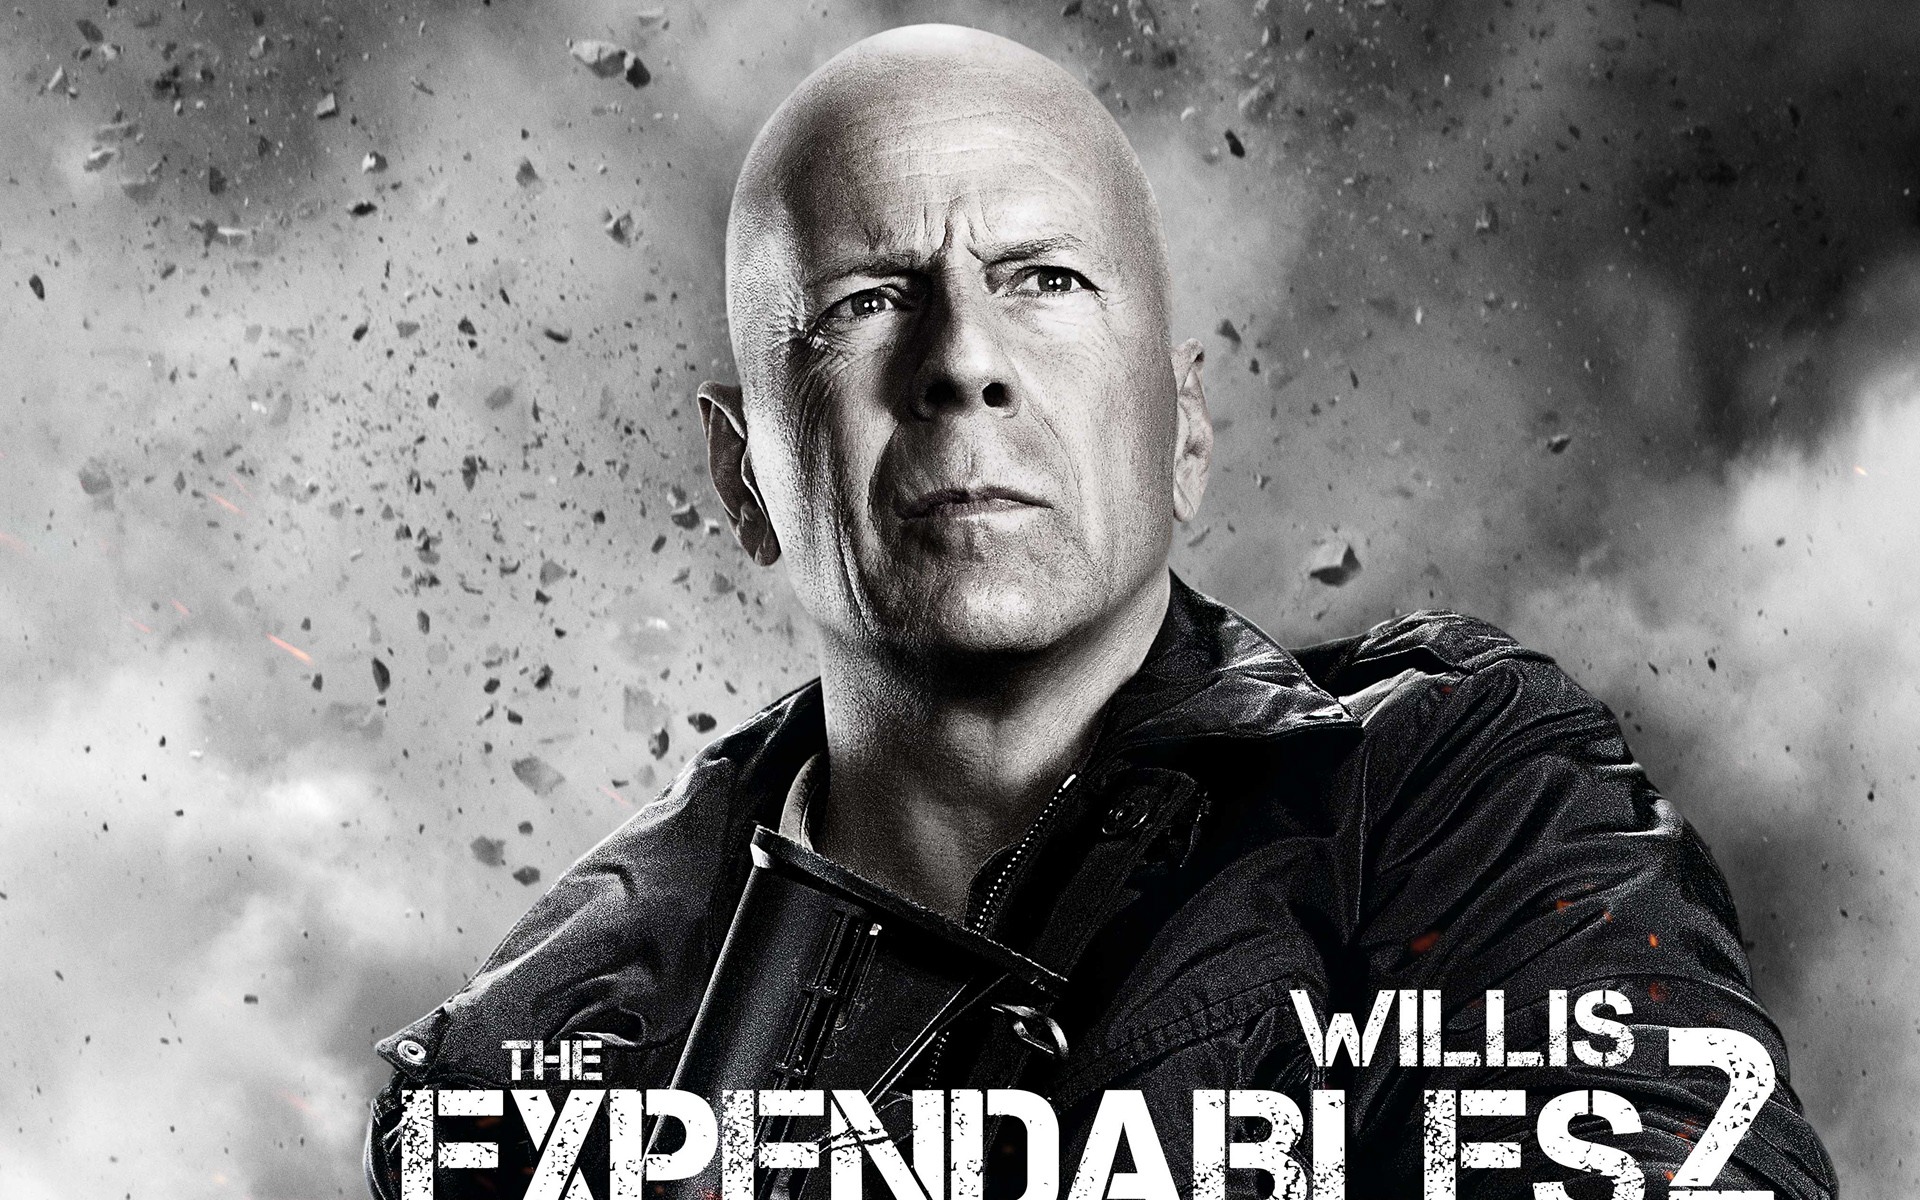 2012 Expendables2 HDの壁紙 #12 - 1920x1200